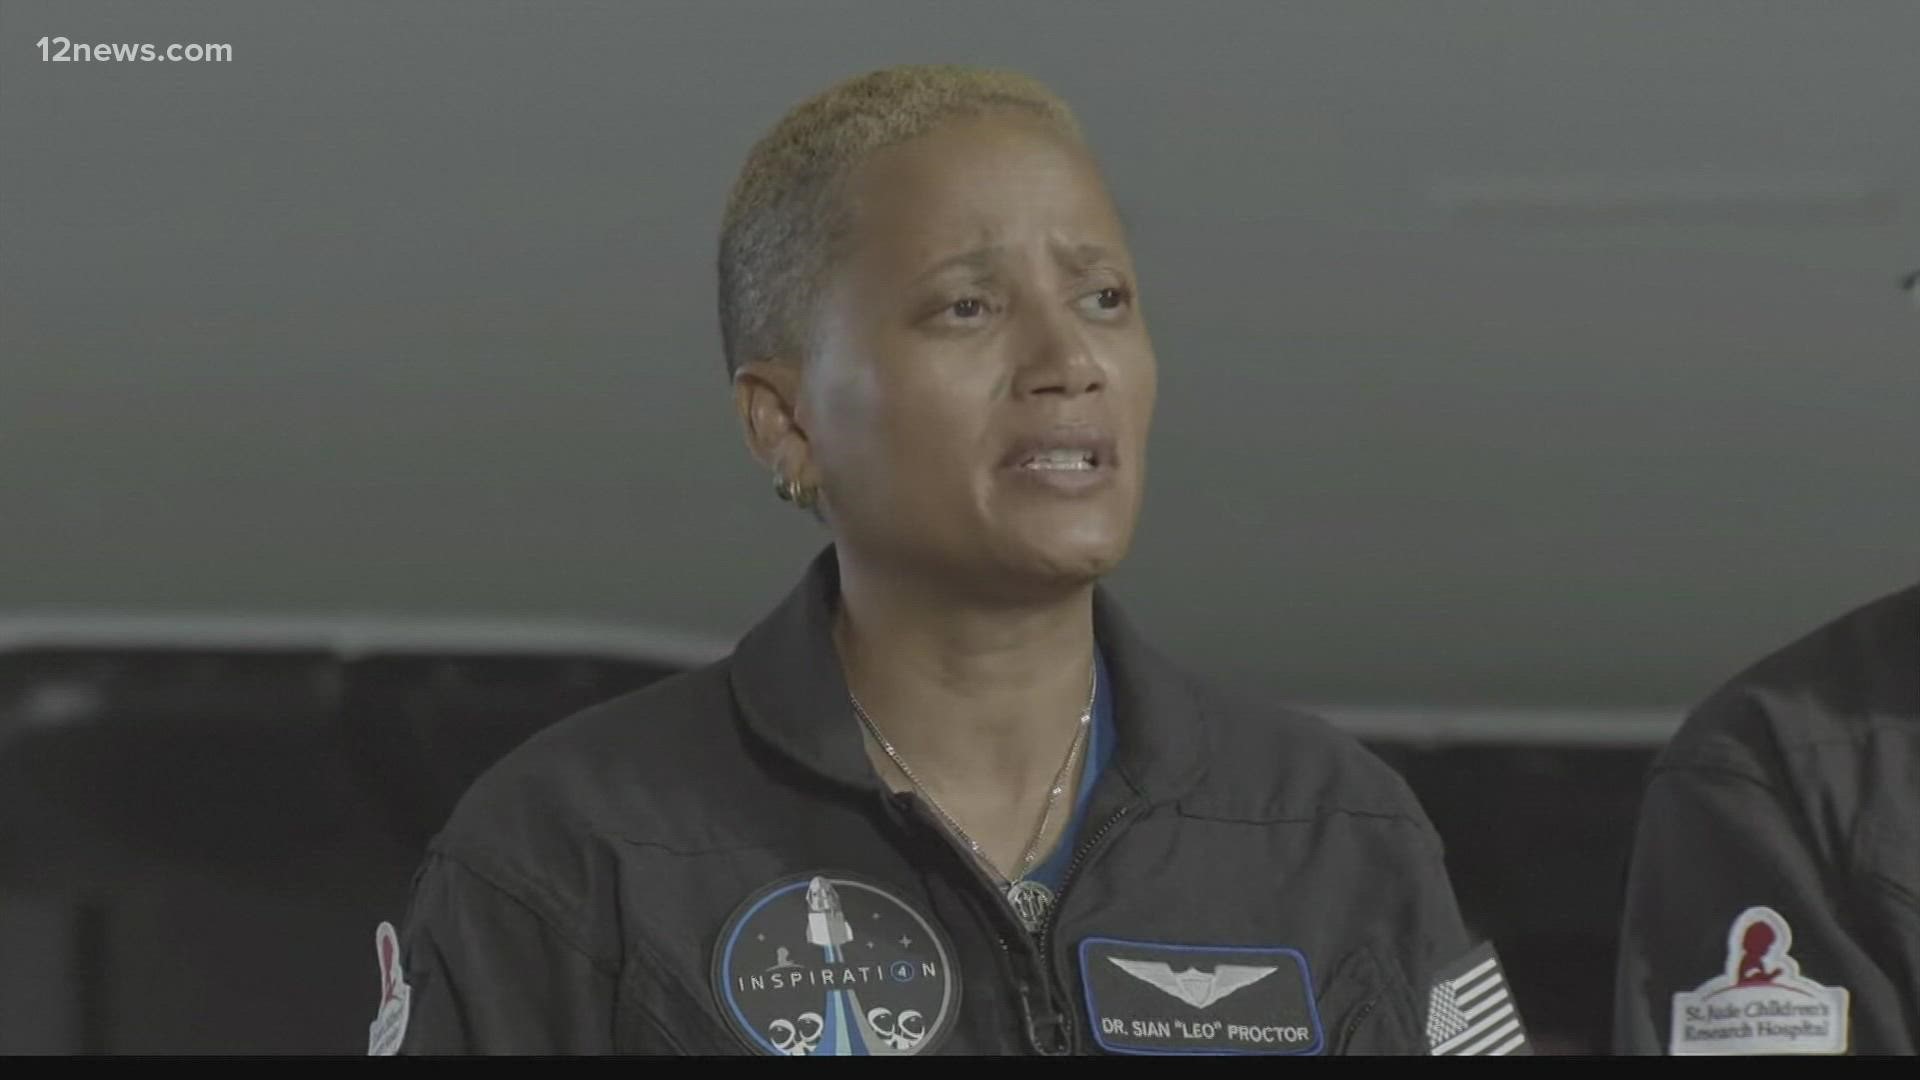 Dr. Sian Proctor, 51, a community college educator in Tempe and she made history on Wednesday as the first Black woman to pilot a space mission.